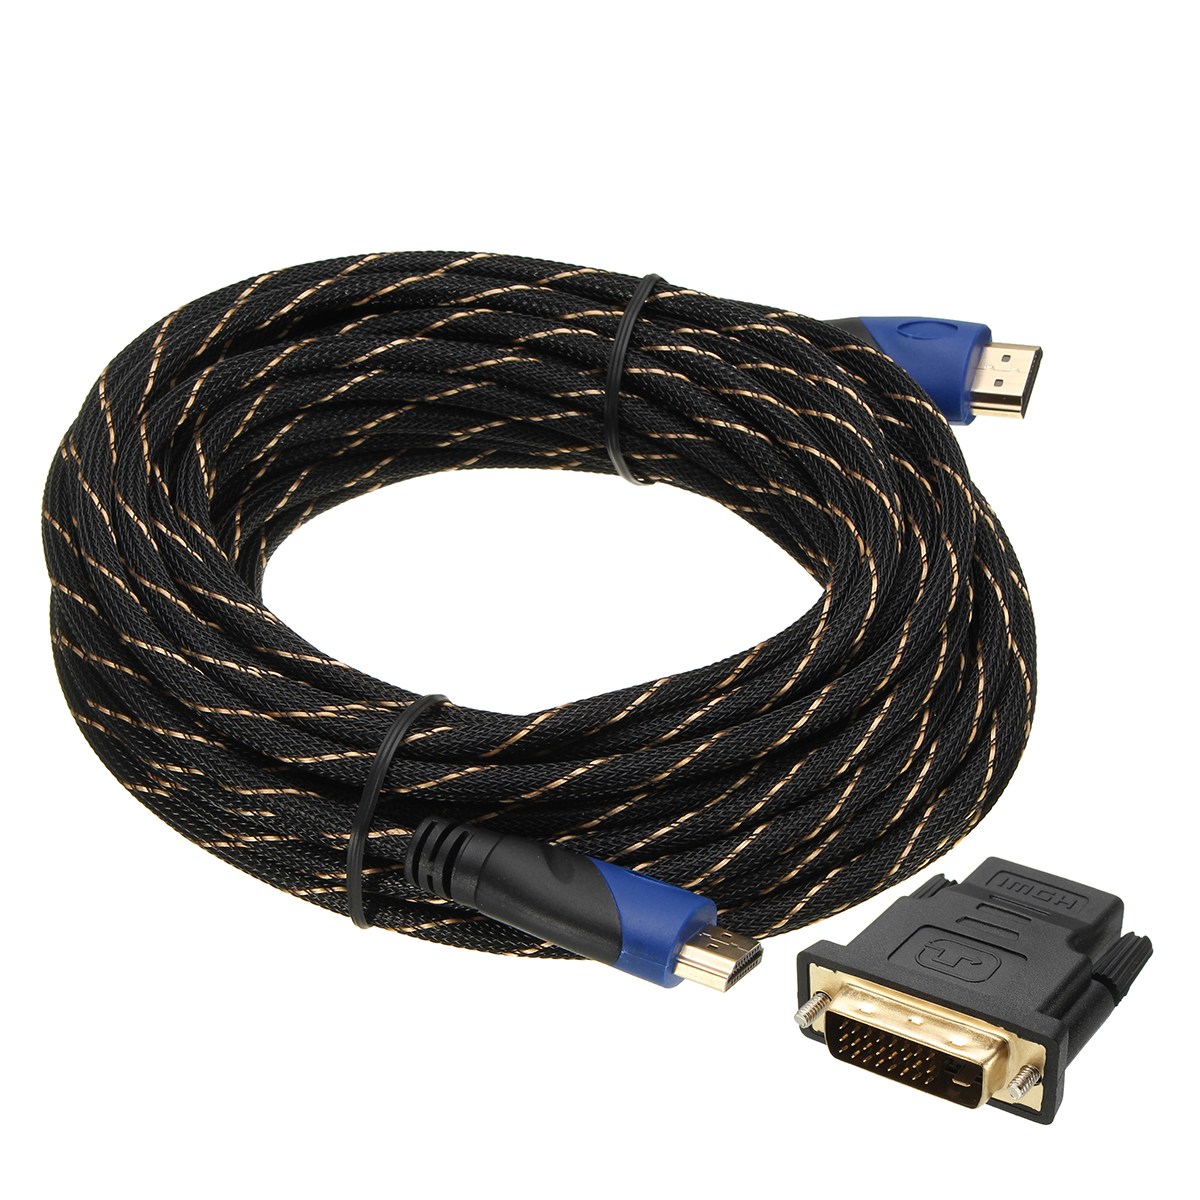 Braided HD Cable V1.4 1080P HD 3D for PS3 Xbox HDTV with DVI Connector 26